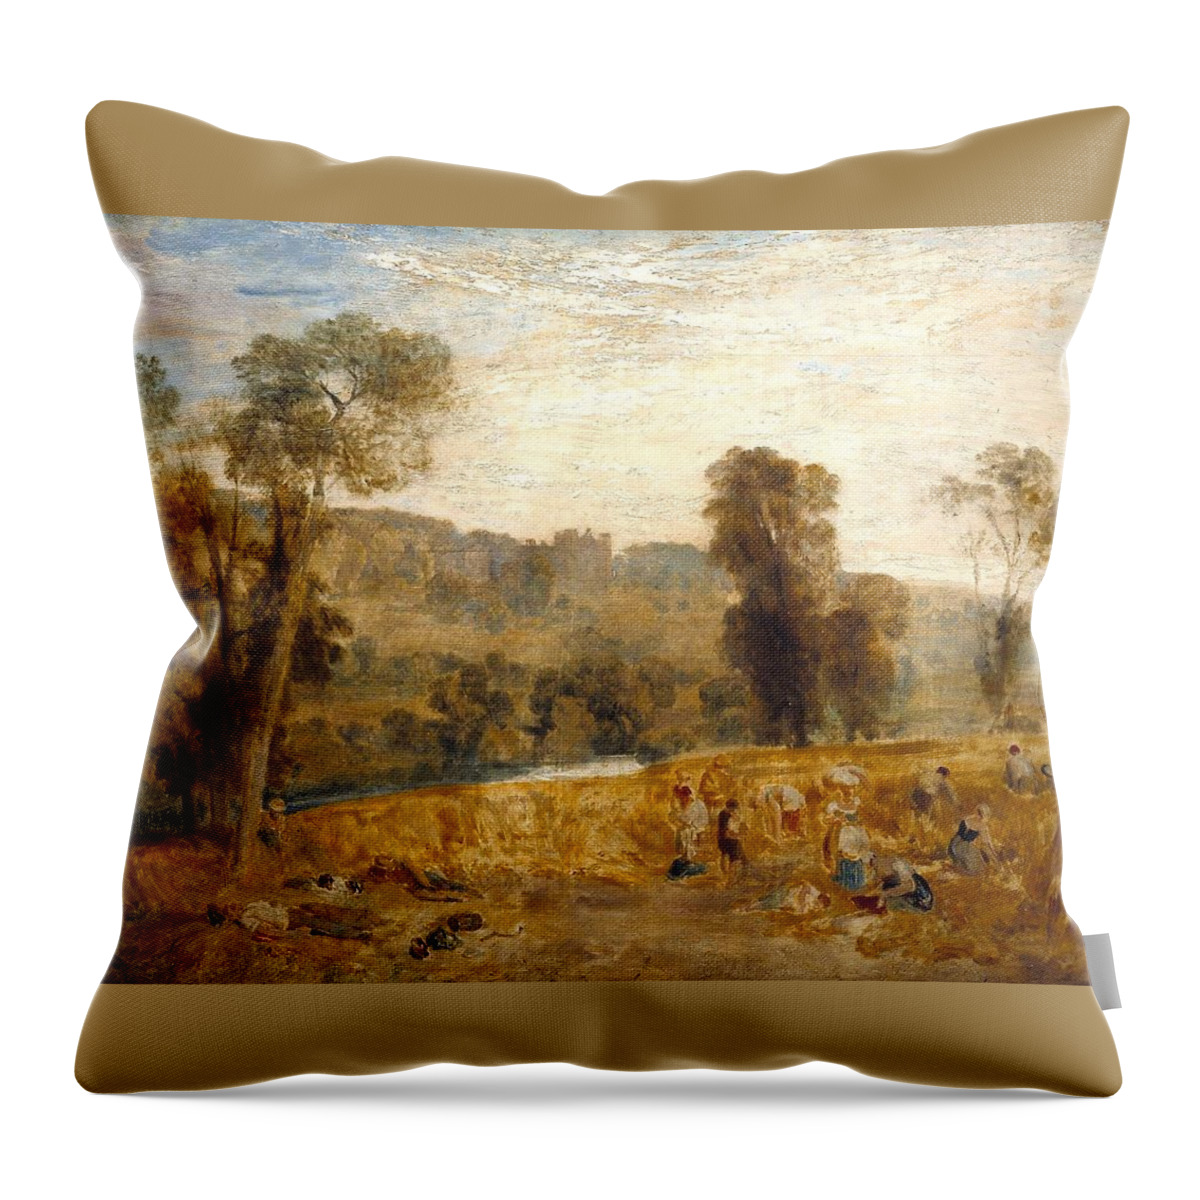 Joseph Mallord William Turner 17751851  Cassiobury Park Reaping Throw Pillow featuring the painting Cassiobury Park Reaping by Joseph Mallord